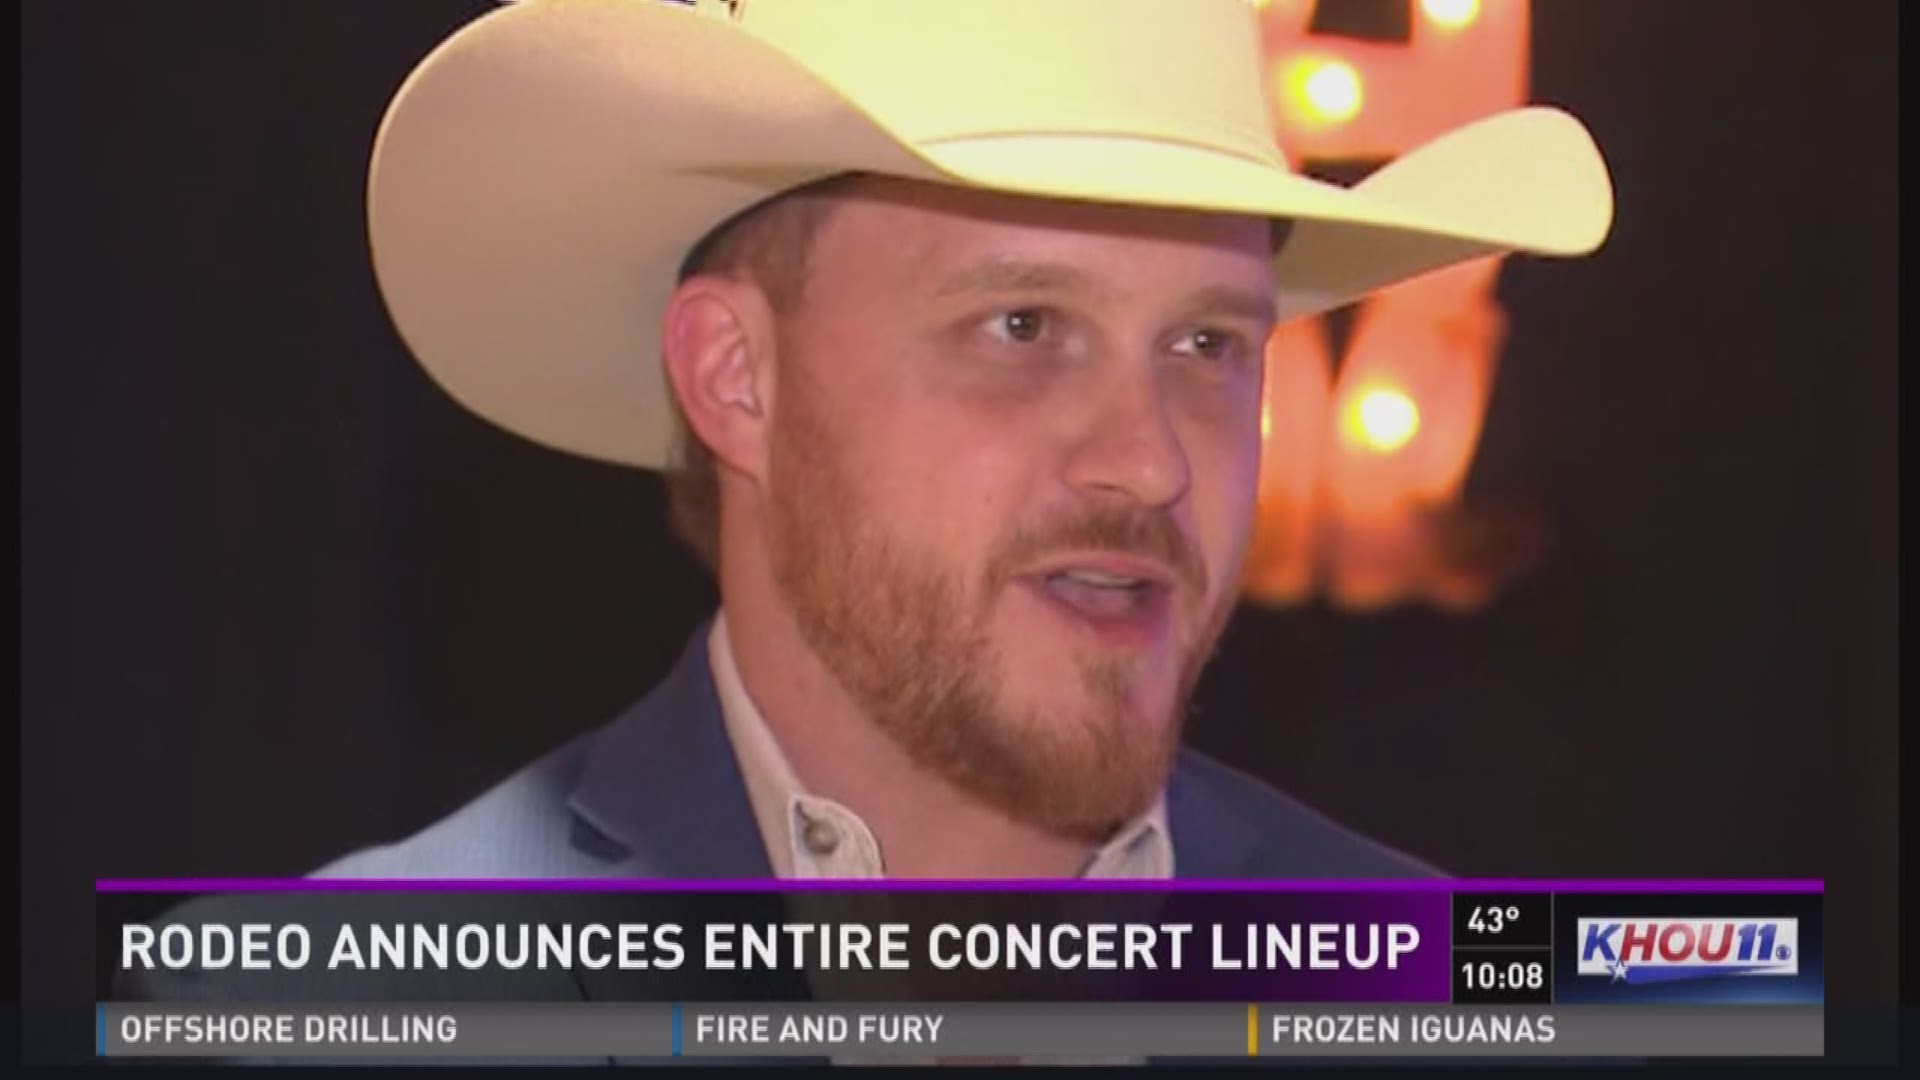 The wait is over for rodeo fans! The entire concert lineup is out for the 2018 Houston Livestock Show and Rodeo.